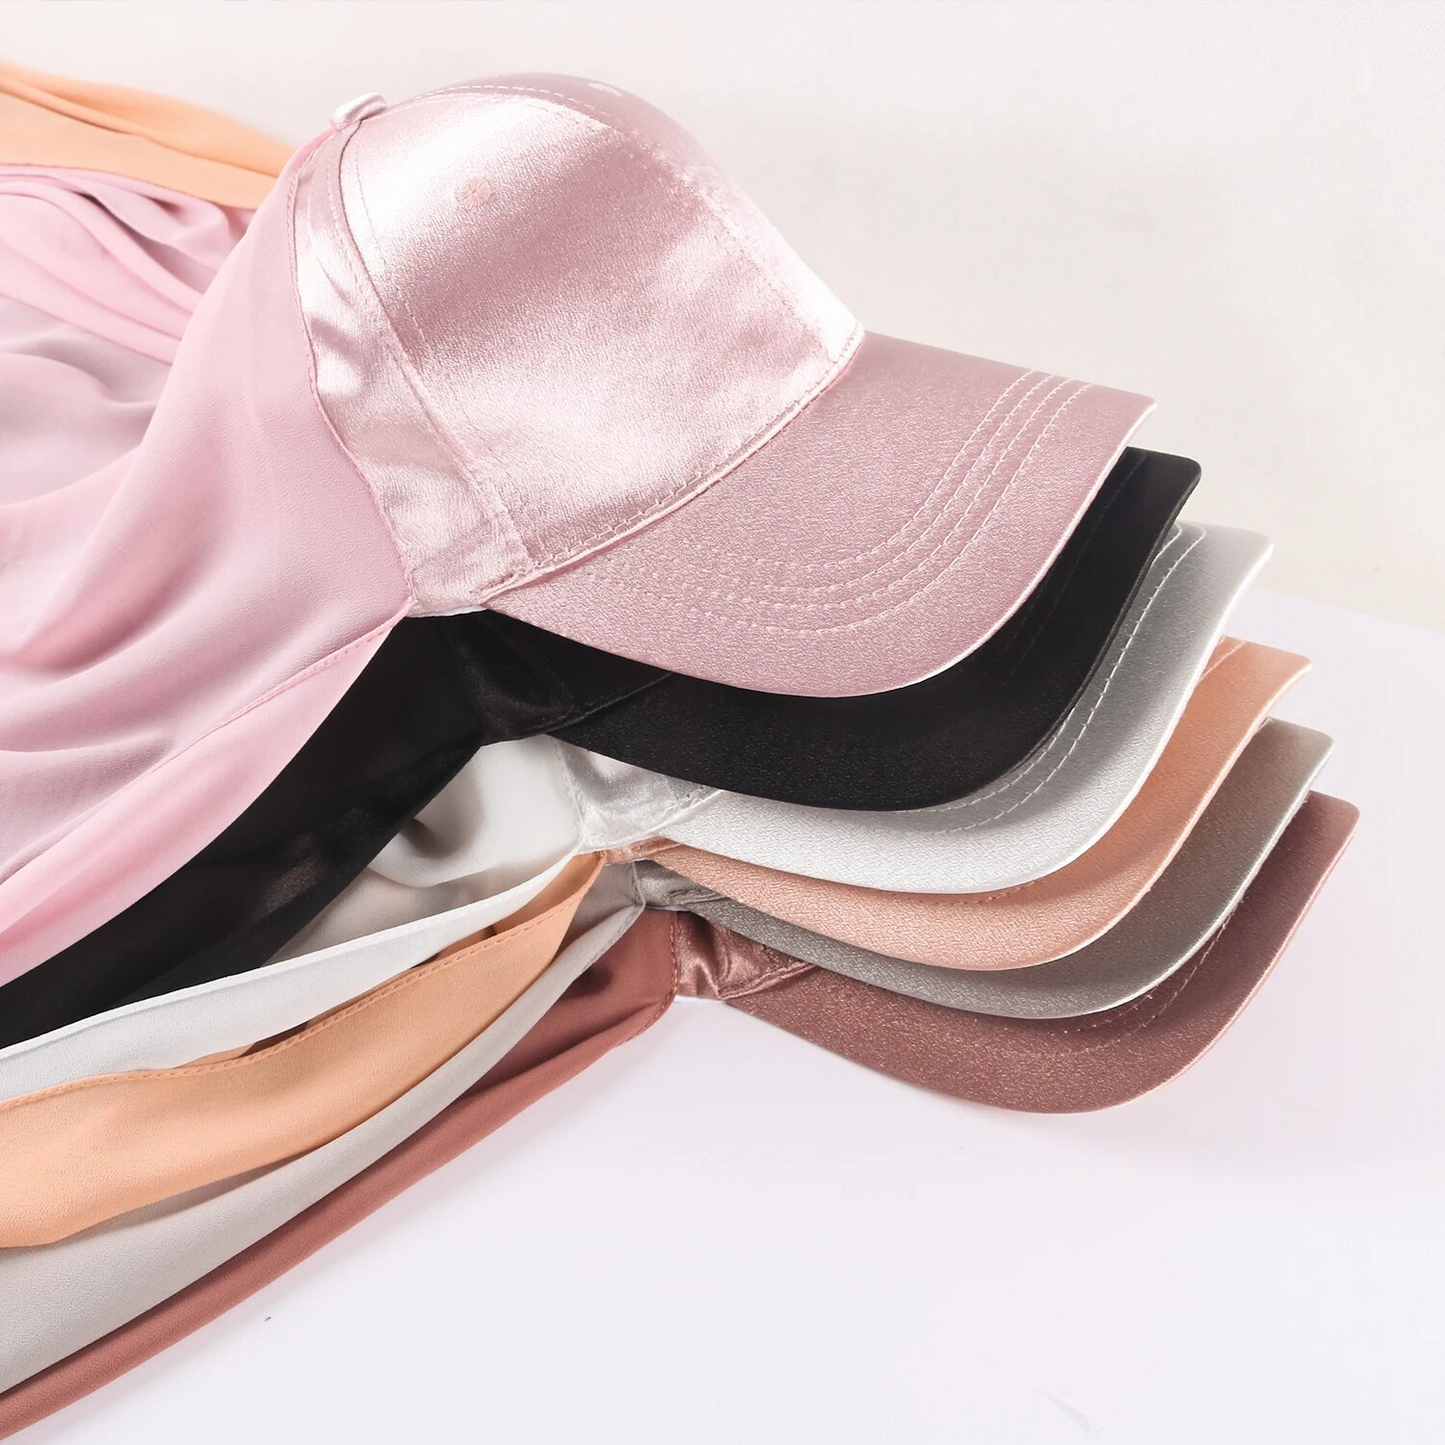 Discover the allure of understated sophistication with Hikmah Boutique's Silver Grey Satin Baseball Cap with Chiffon Hijab. This striking accessory seamlessly marries the timeless charm of a classic baseball cap with the lustrous elegance of satin, coupled with the grace and flow of chiffon hijab.